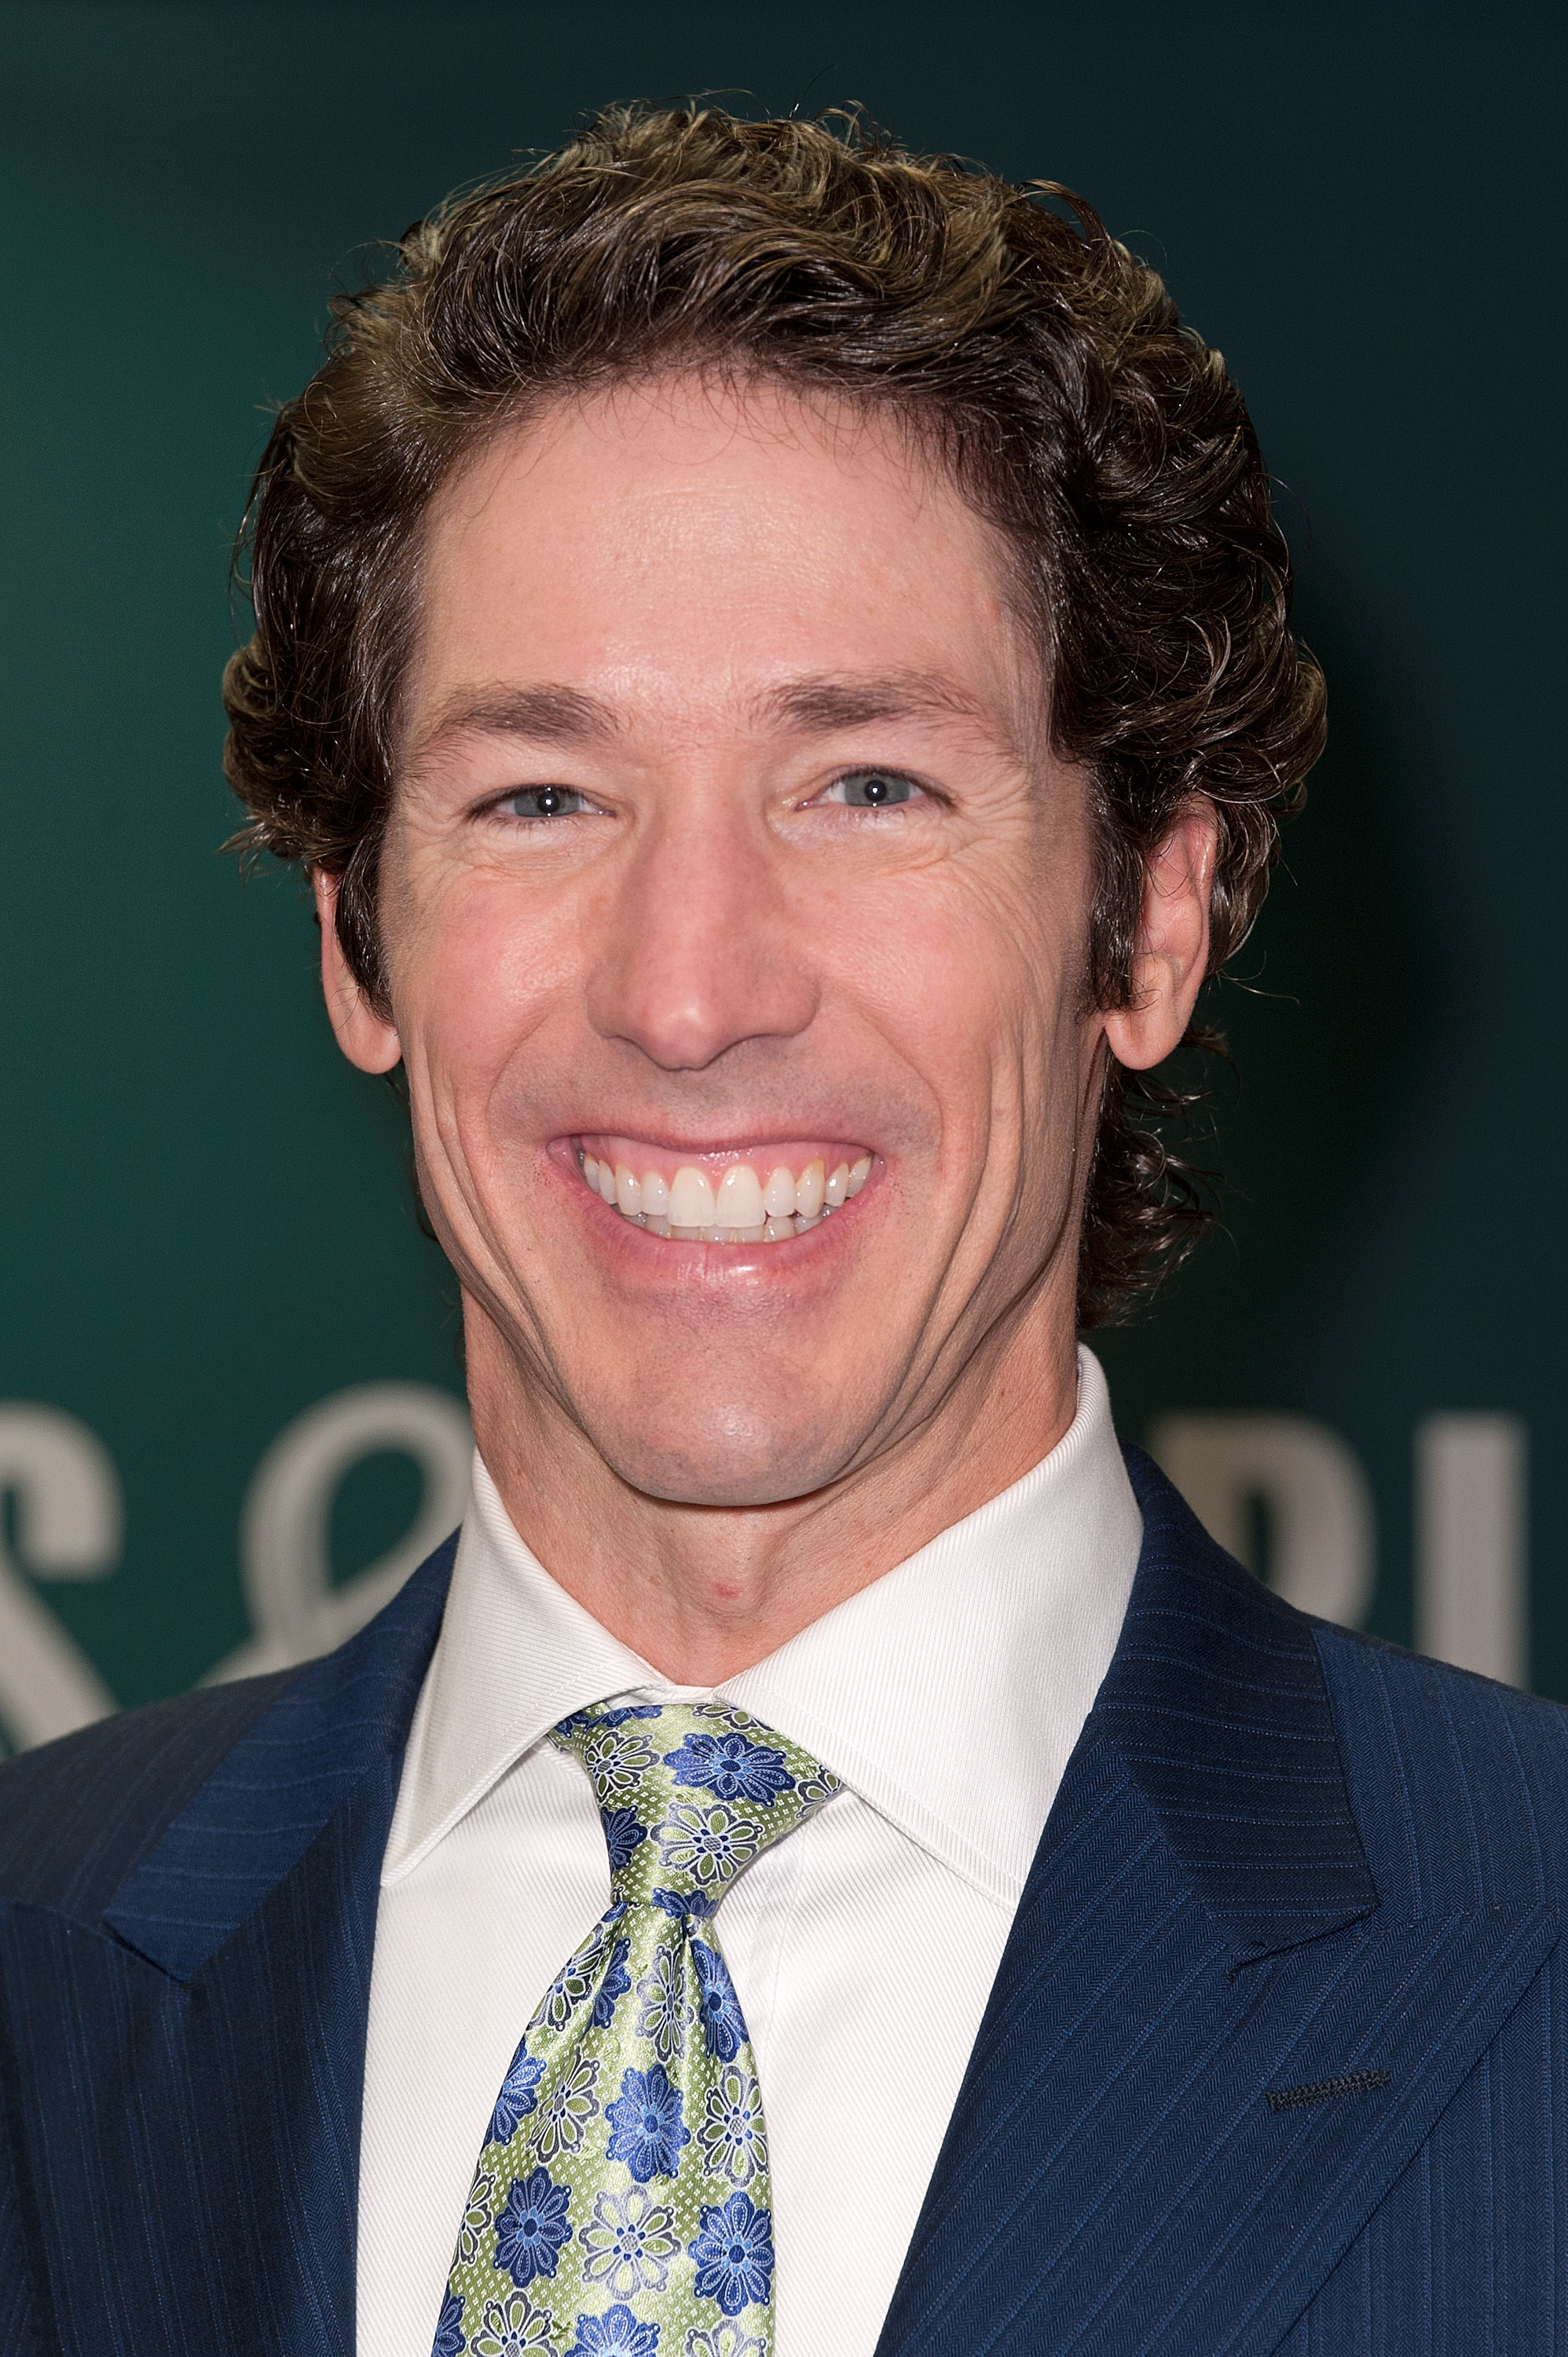 Joel Osteen’s Net Worth 5 Fast Facts You Need to Know